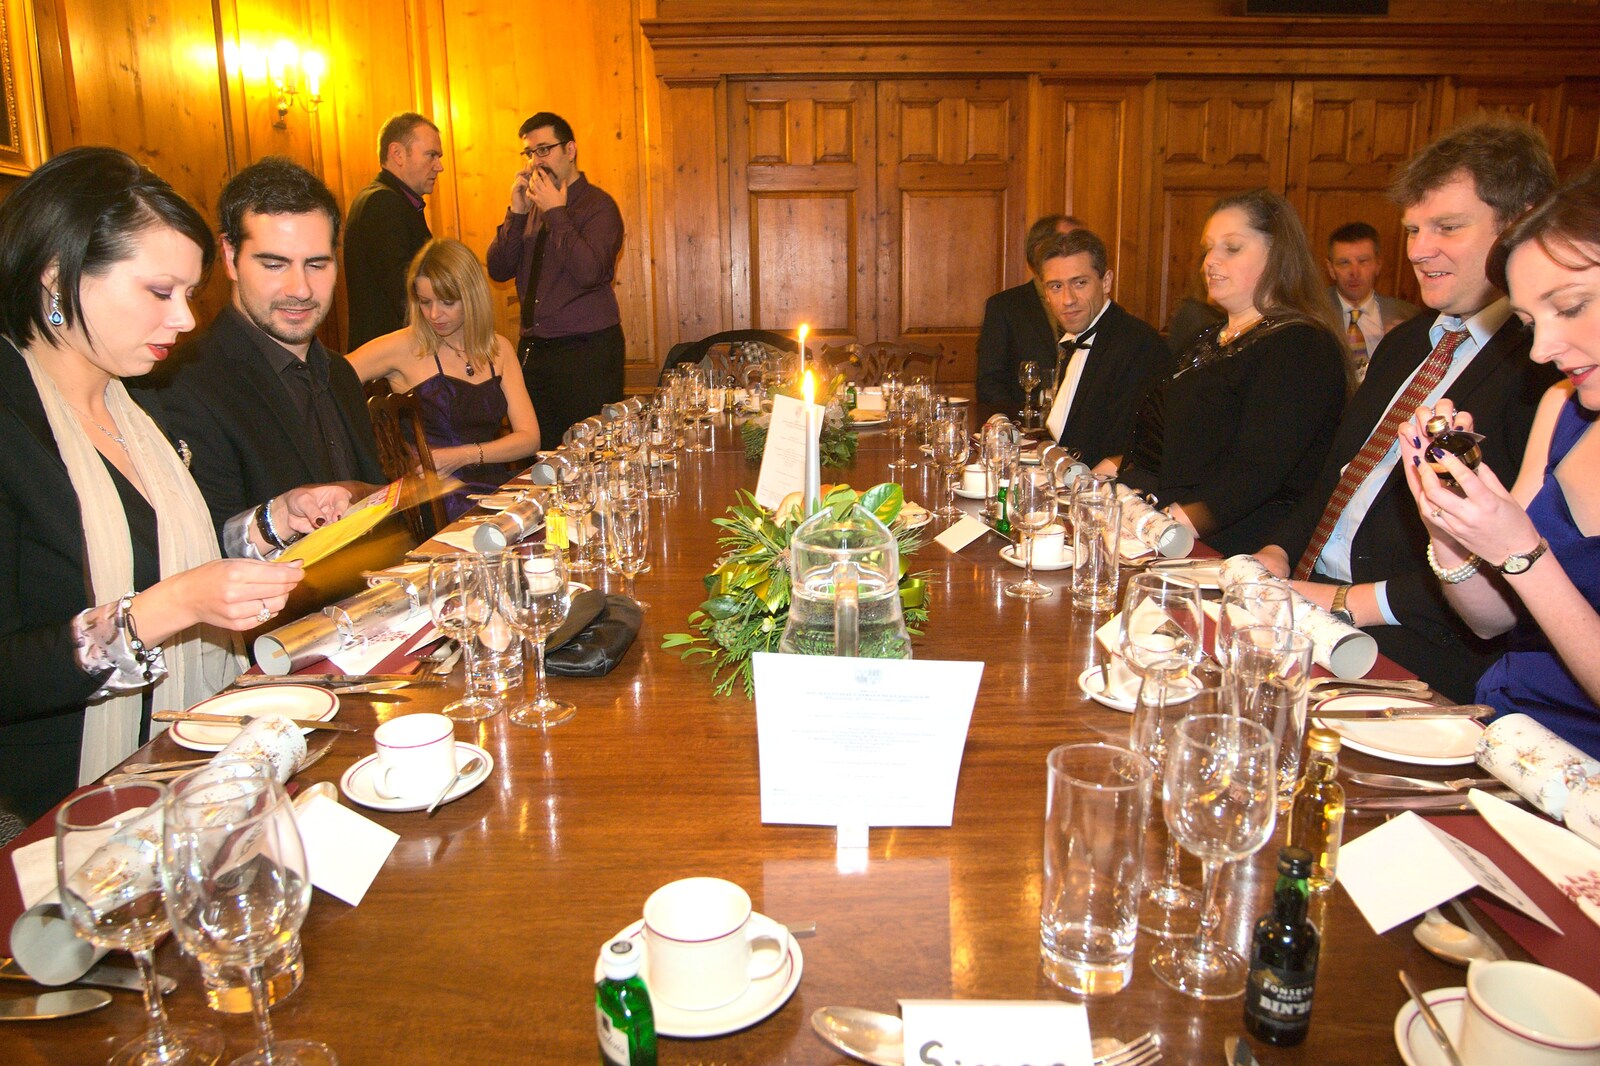 Qualcomm sits down for dinner from A Qualcomm Christmas, Christ's College, Cambridge - 8th December 2011